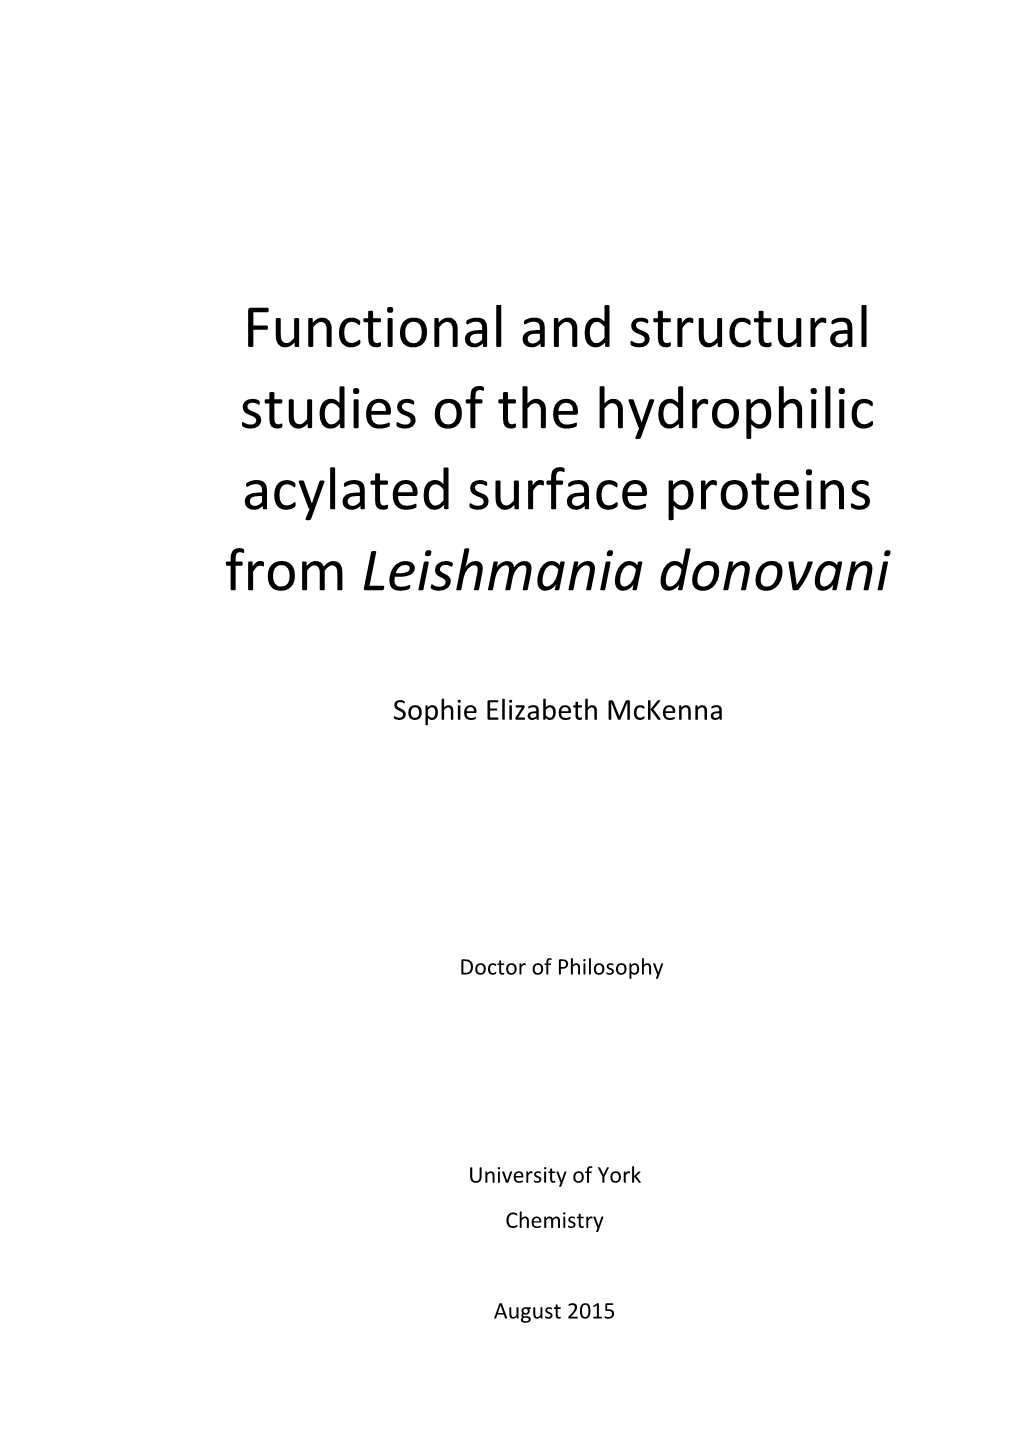 Functional and Structural Studies of the Hydrophilic Acylated Surface